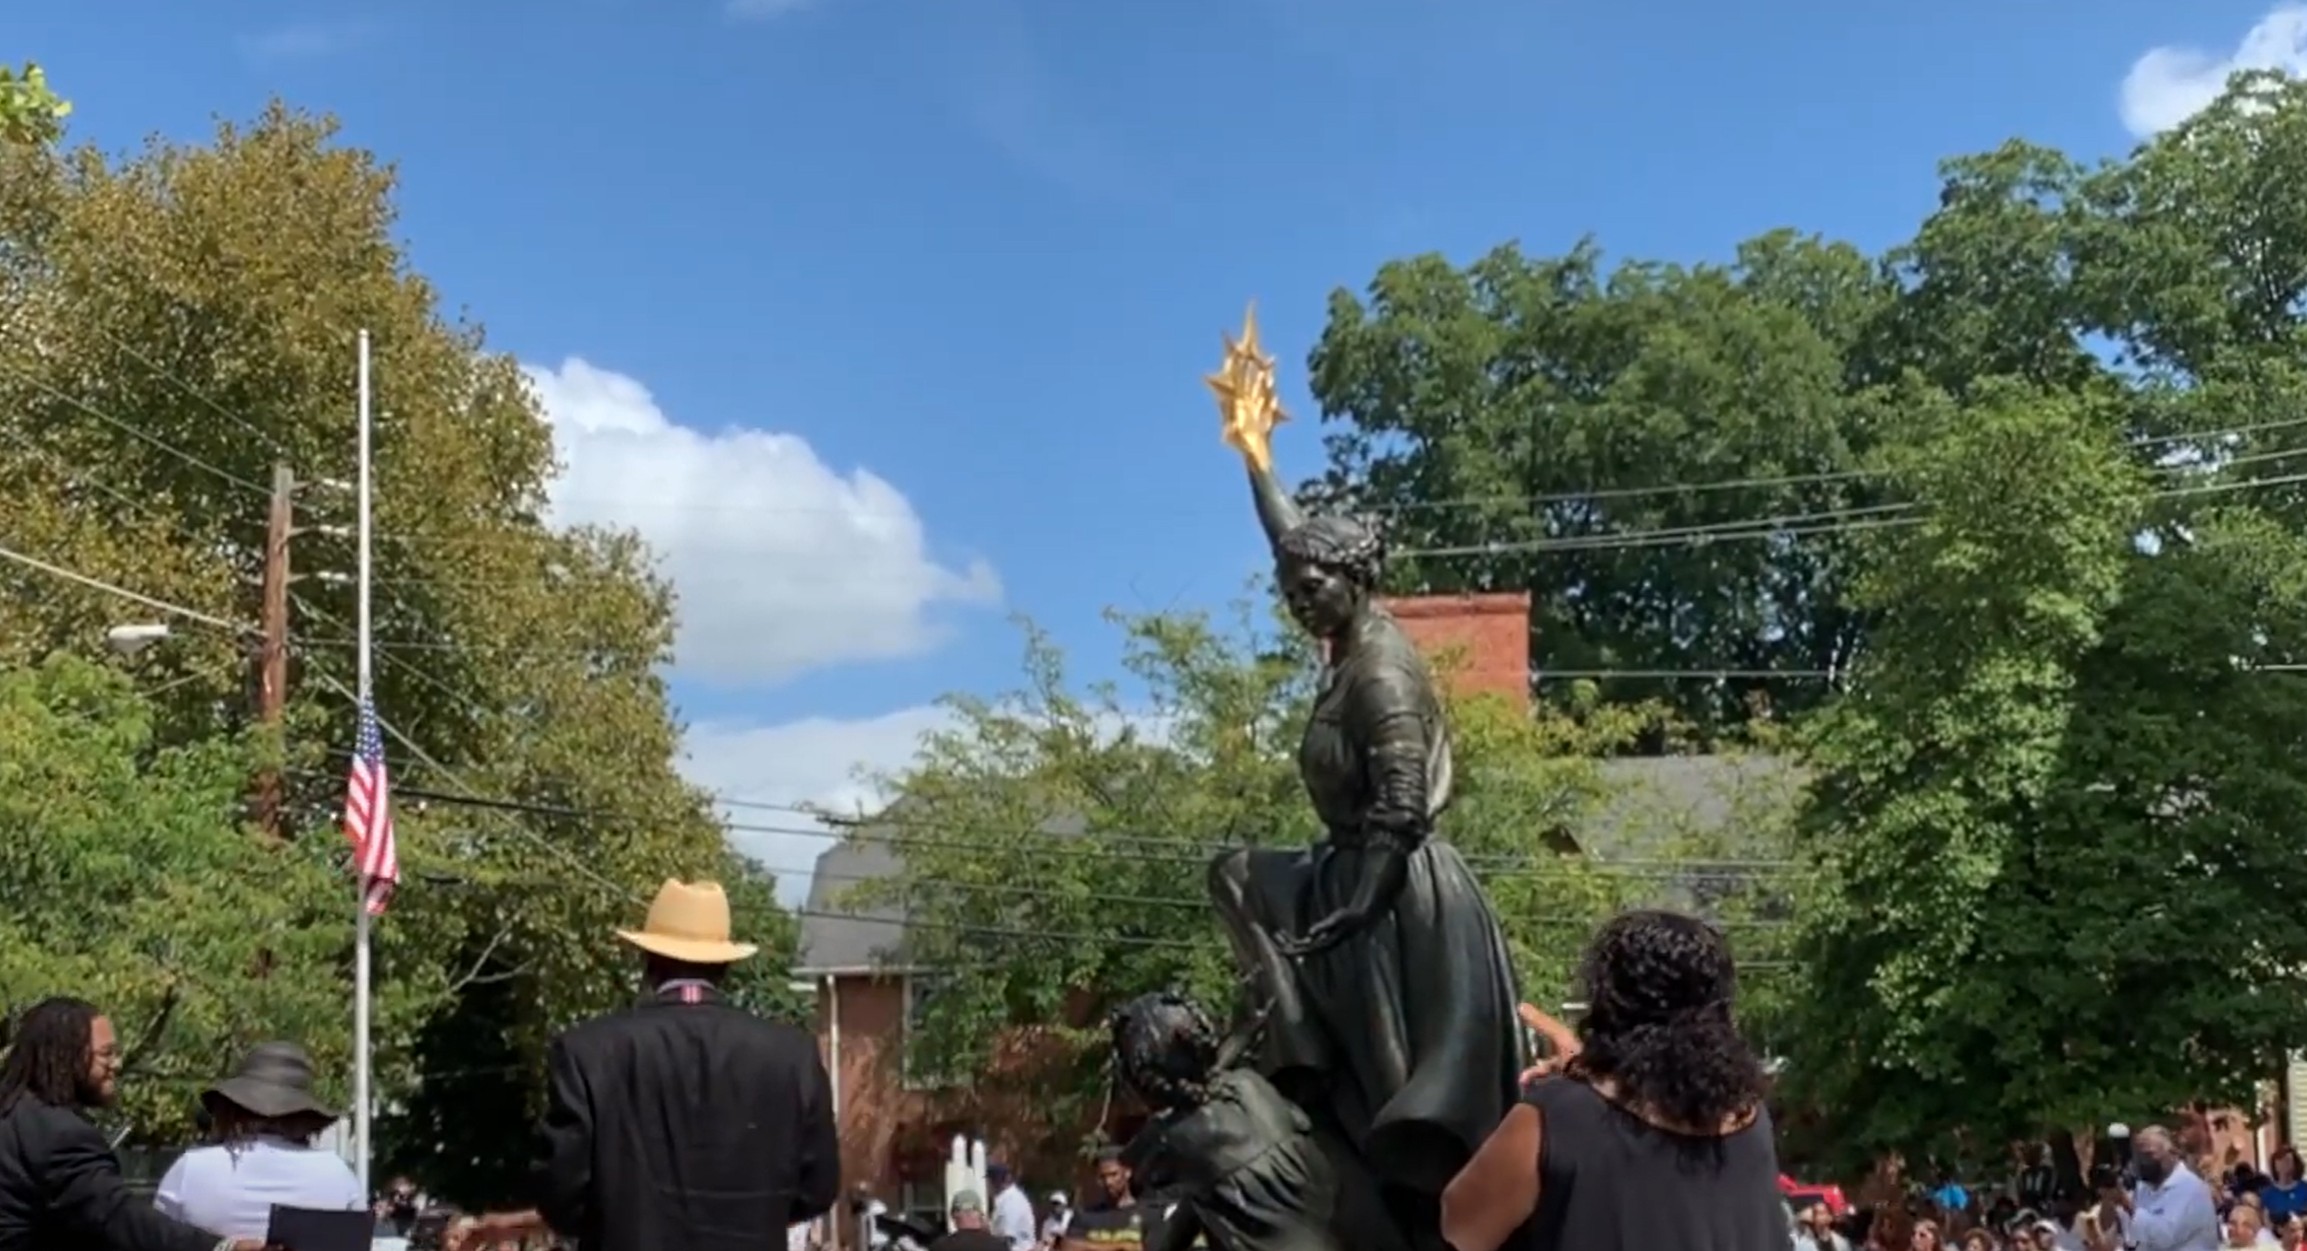 VIDEO: Visitors Flock to Cambridge to See Tubman Immortalized with 13-Foot Sculpture